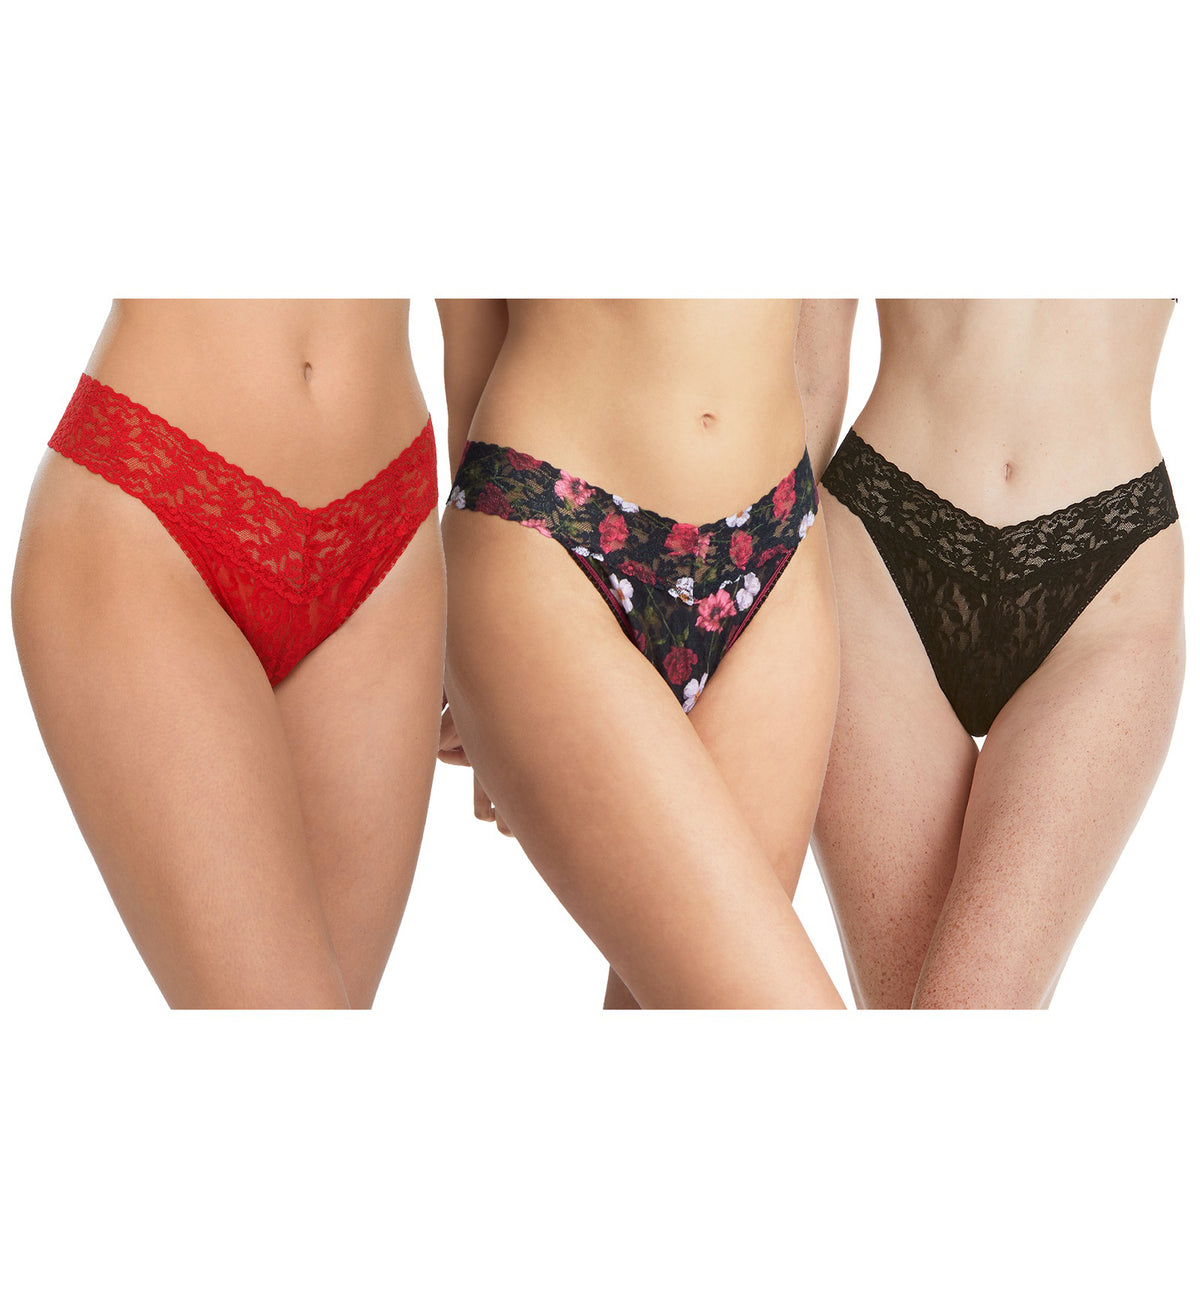 Hanky Panky 3-PACK Signature Lace Original Rise Thong (48113PK),Am I Dreaming - Red/Am I Dreaming/Black,One Size